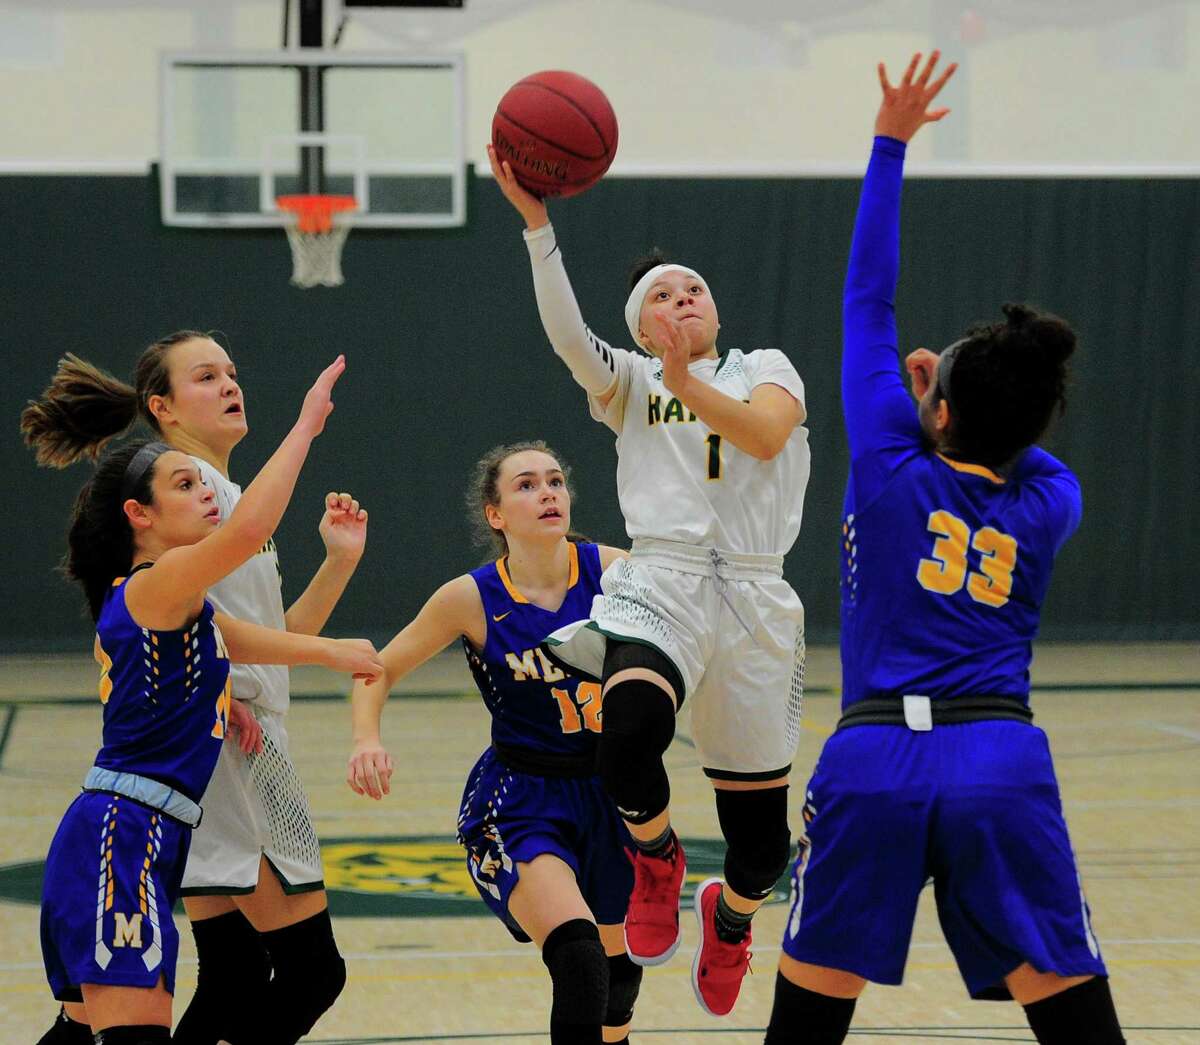 Hamden’s Asya Brandon goes up for a shot against Mercy on Tuesday at Hamden High. No. 5 Hamden defeated the No. 1 Tigers, 51-36, in the season opener for both teams.